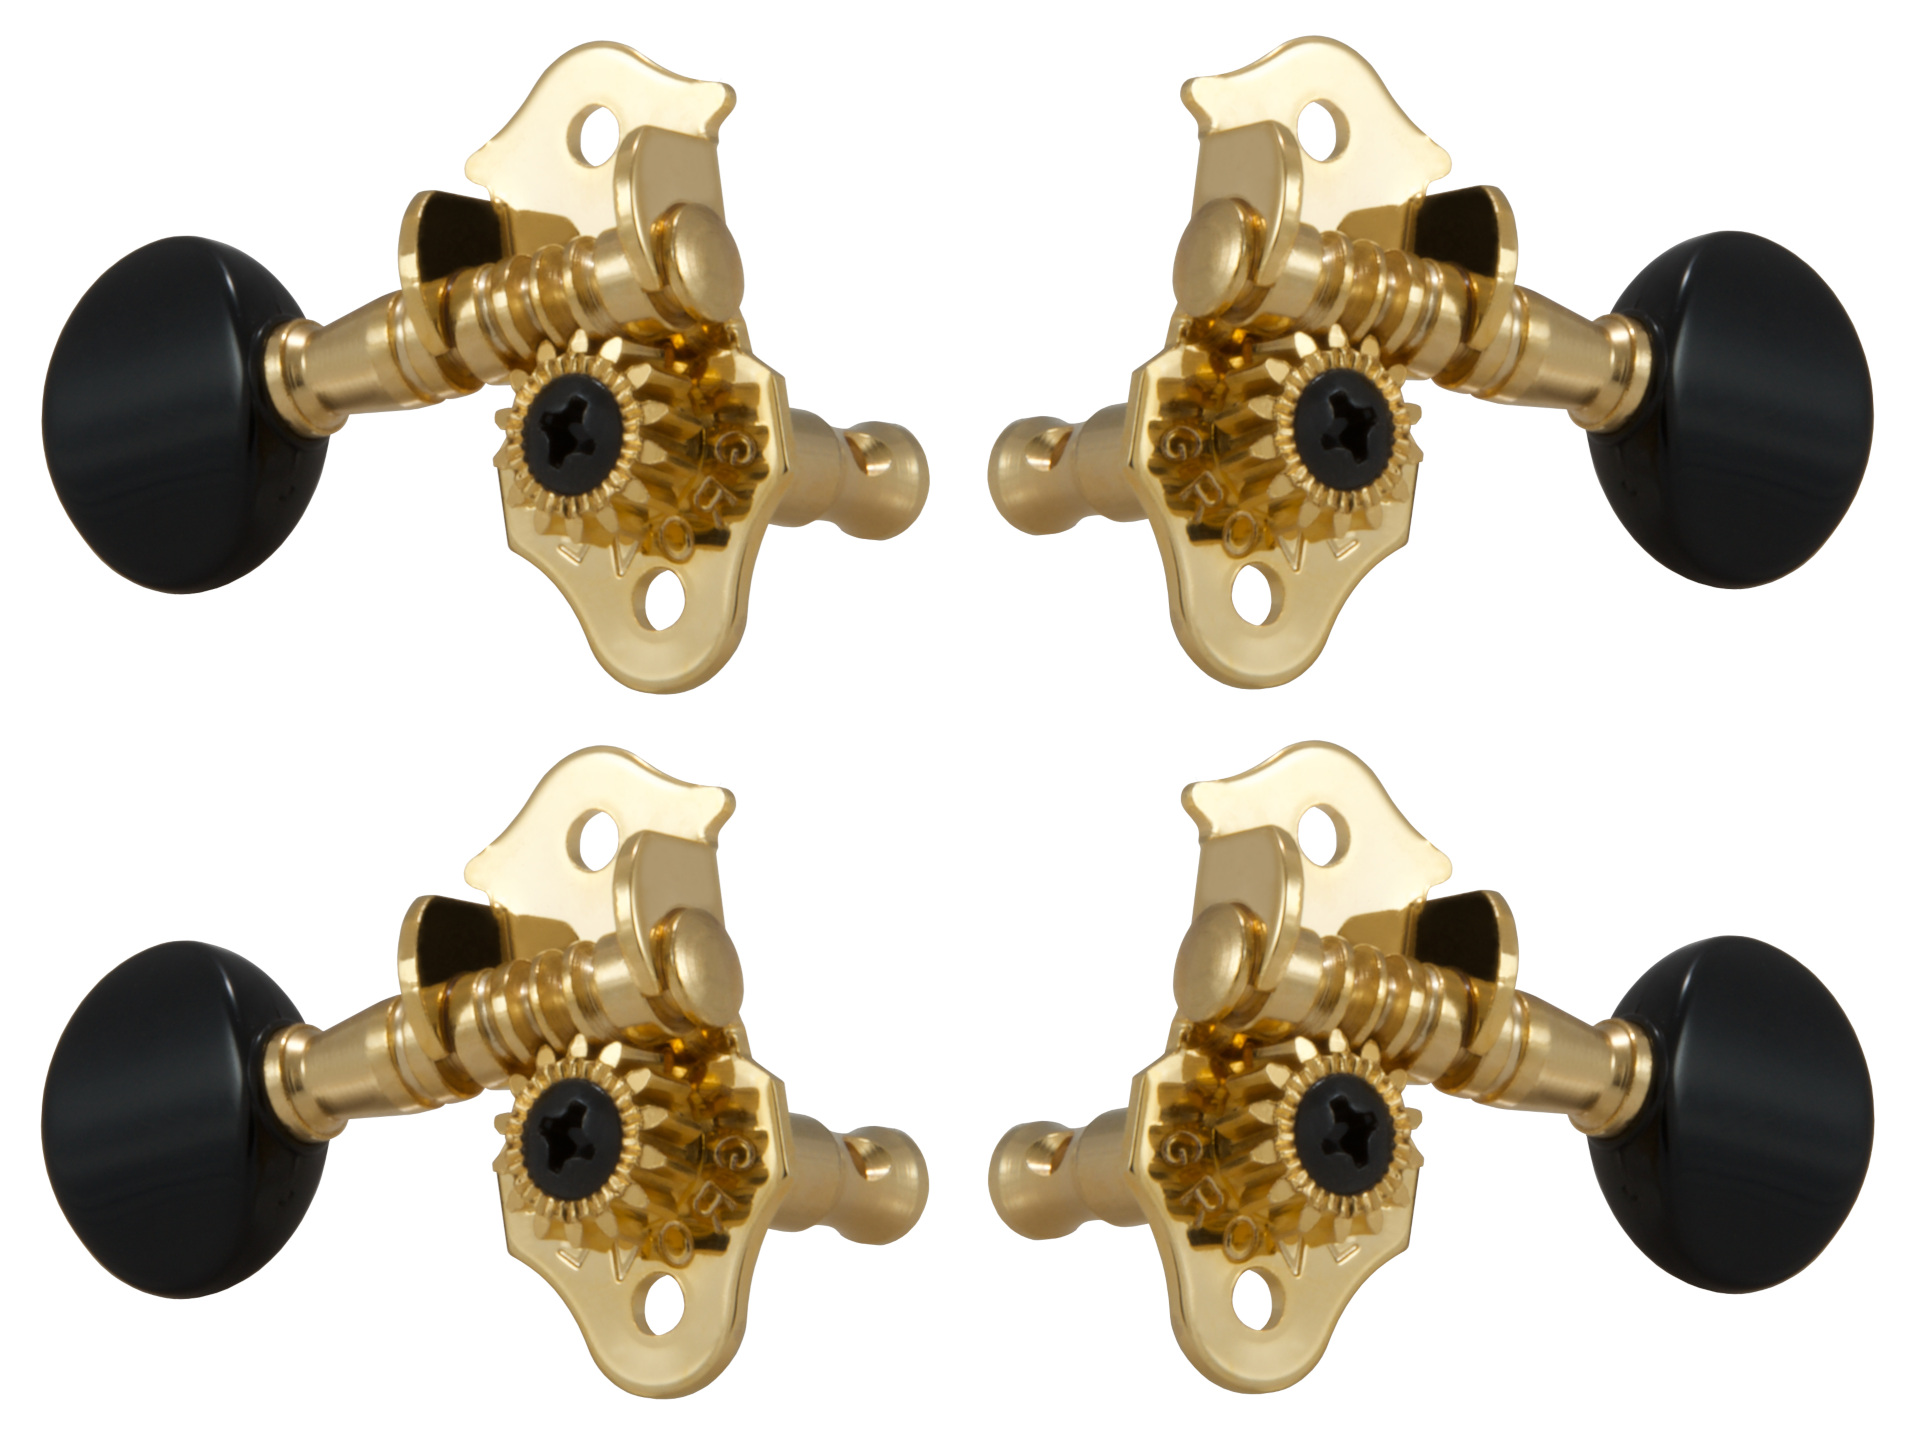 Grover 9GB Sta-Tite Geared Ukulele Pegs with Black Button - 4 pcs. - Gold